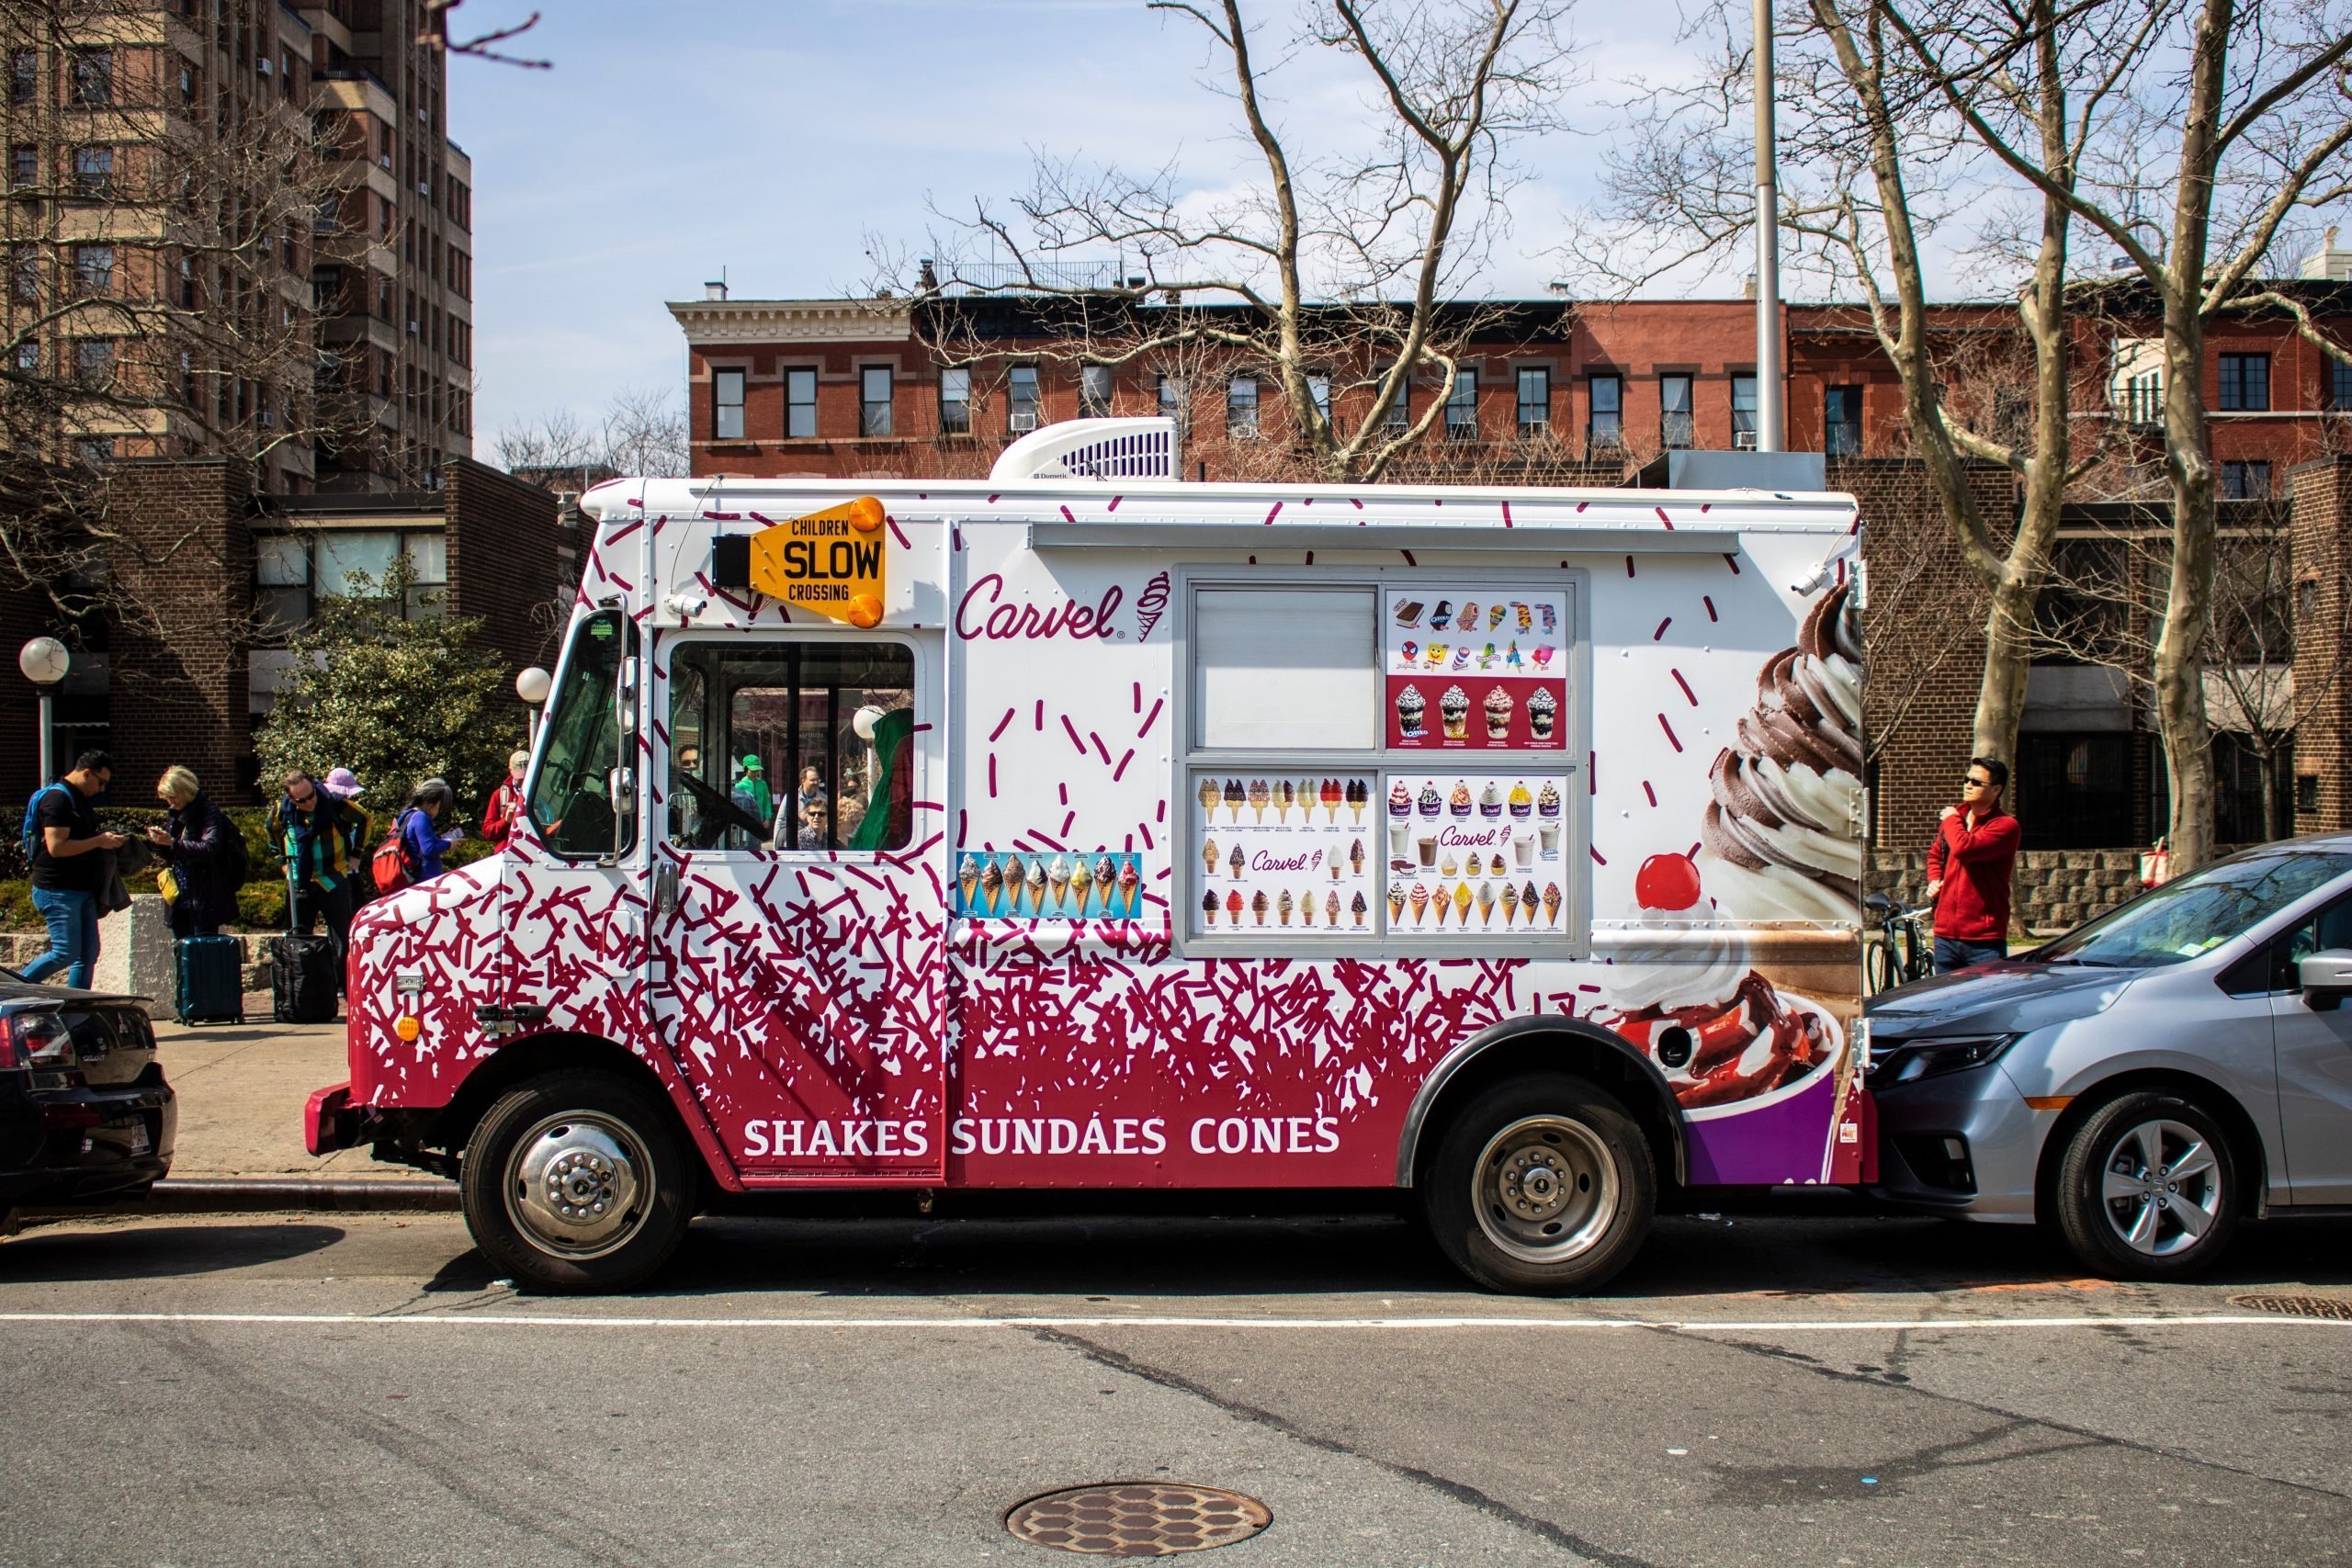 Things Ice Cream Truck Workers Won't 